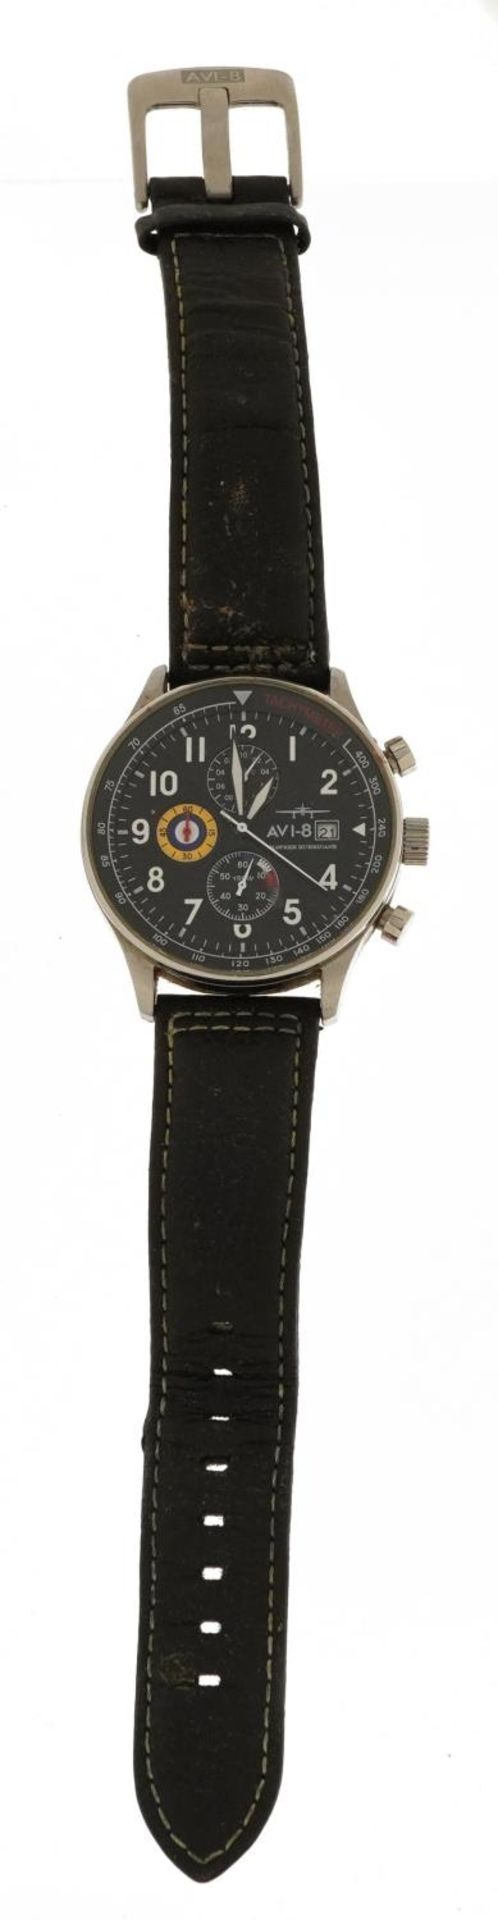 Gentlemen's A V I-8 Hawker Hurricane RAF interest wristwatch with date aperture, the case 43mm in - Image 2 of 4